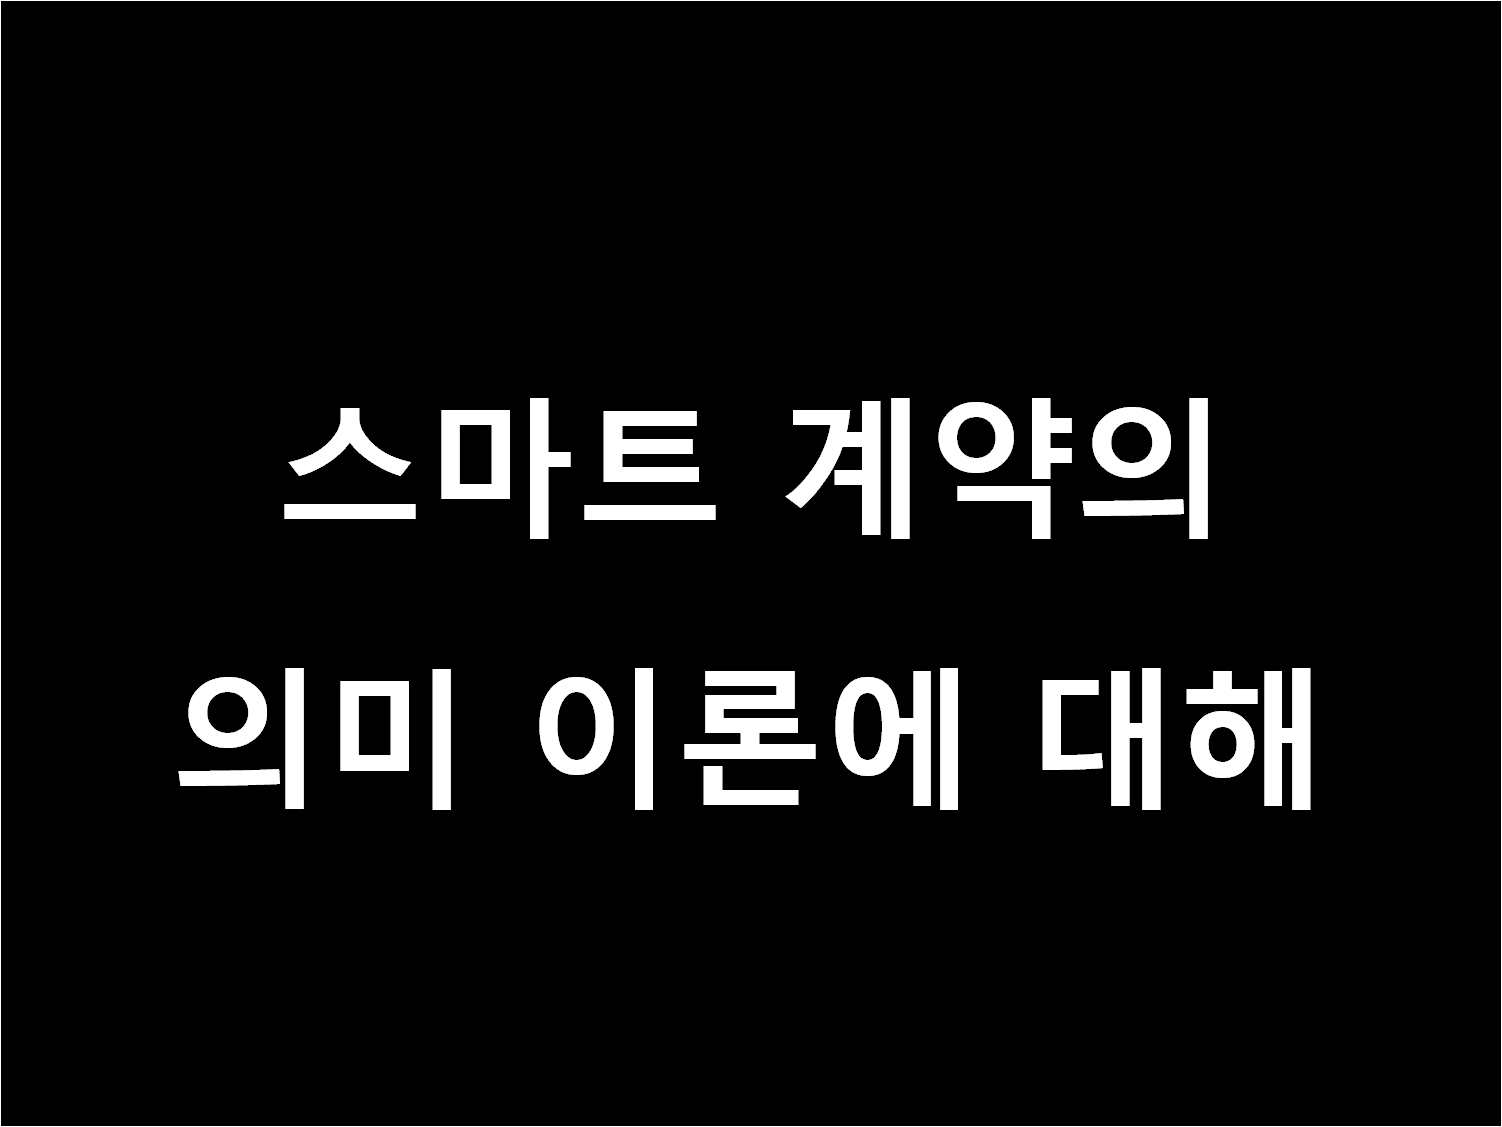 &#49828;&#47560;&#53944; &#44228;&#50557;&#51032; &#51032;&#48120;&#51060;&#47200;.png